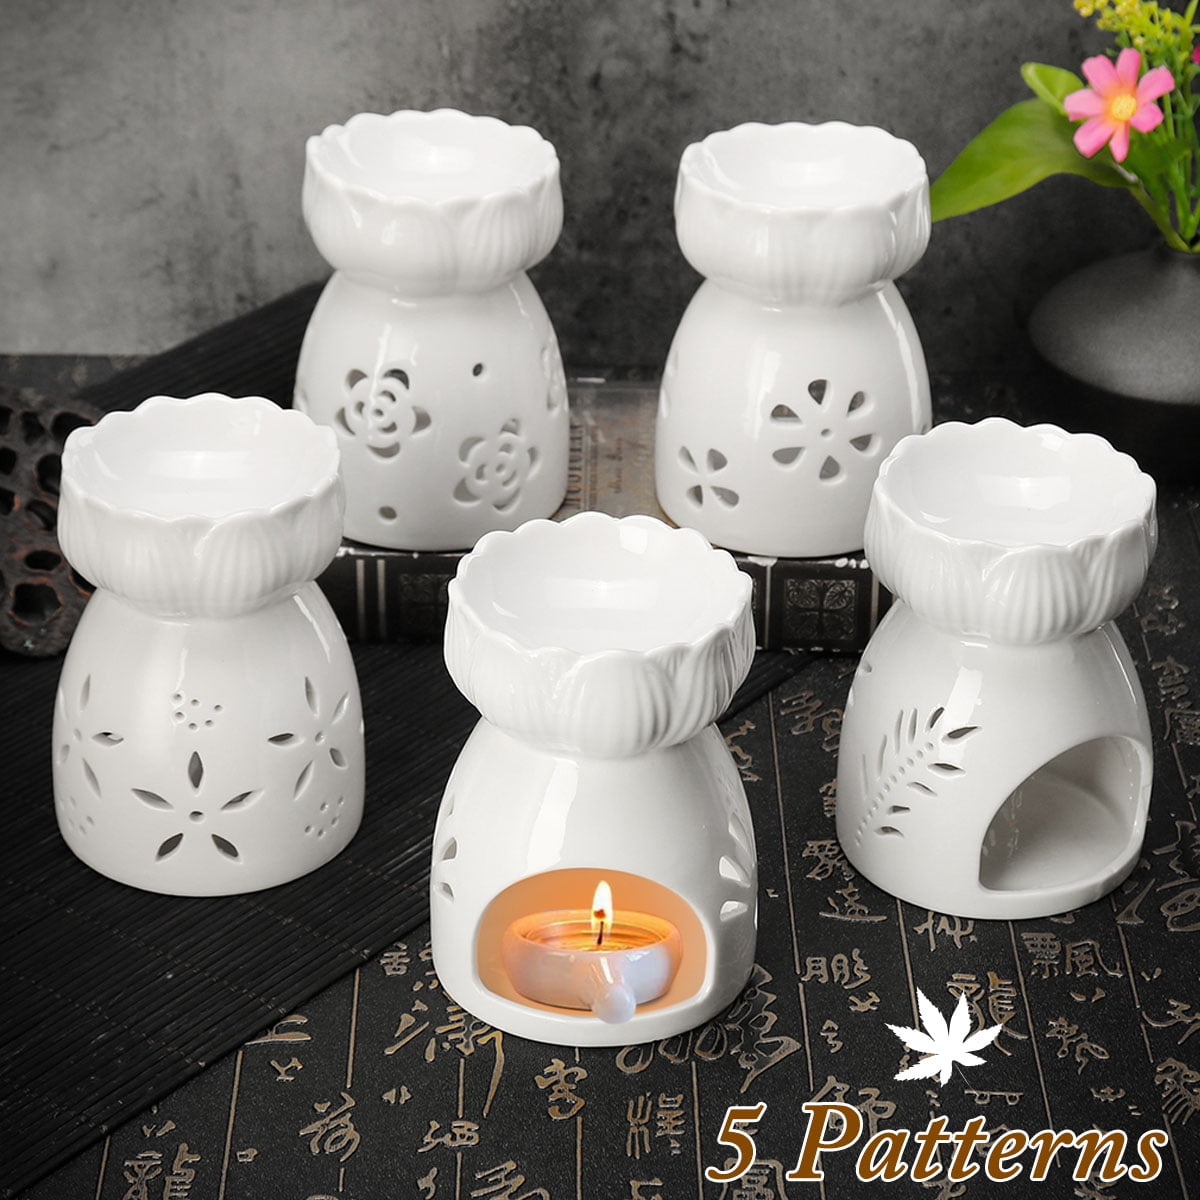 Patio WANYA Ceramic Tea Light Holder Wax Warmer Great Decoration for Living Room Porch and Garden White Balcony Aromatherapy Essential Oil Burner 